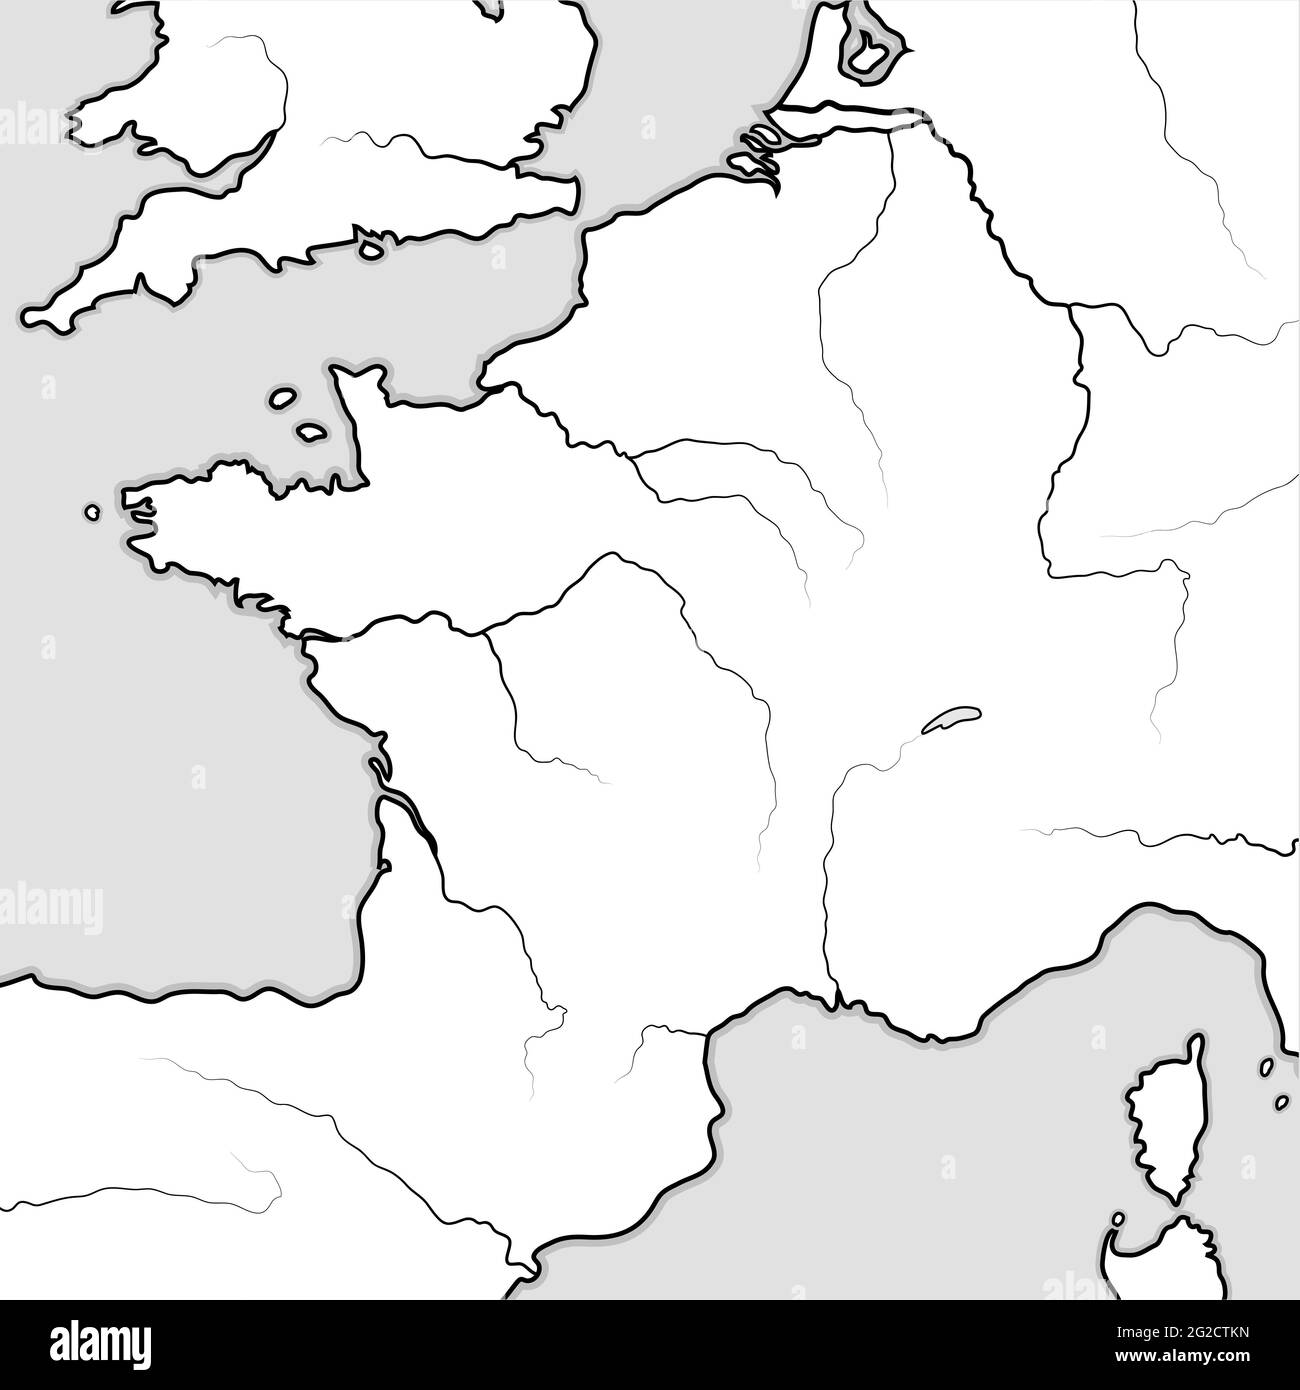 Map of The FRENCH Lands: France, Provence, Normandie, Occitanie, Aquitaine, Lorraine. Geographic chart. Stock Photo